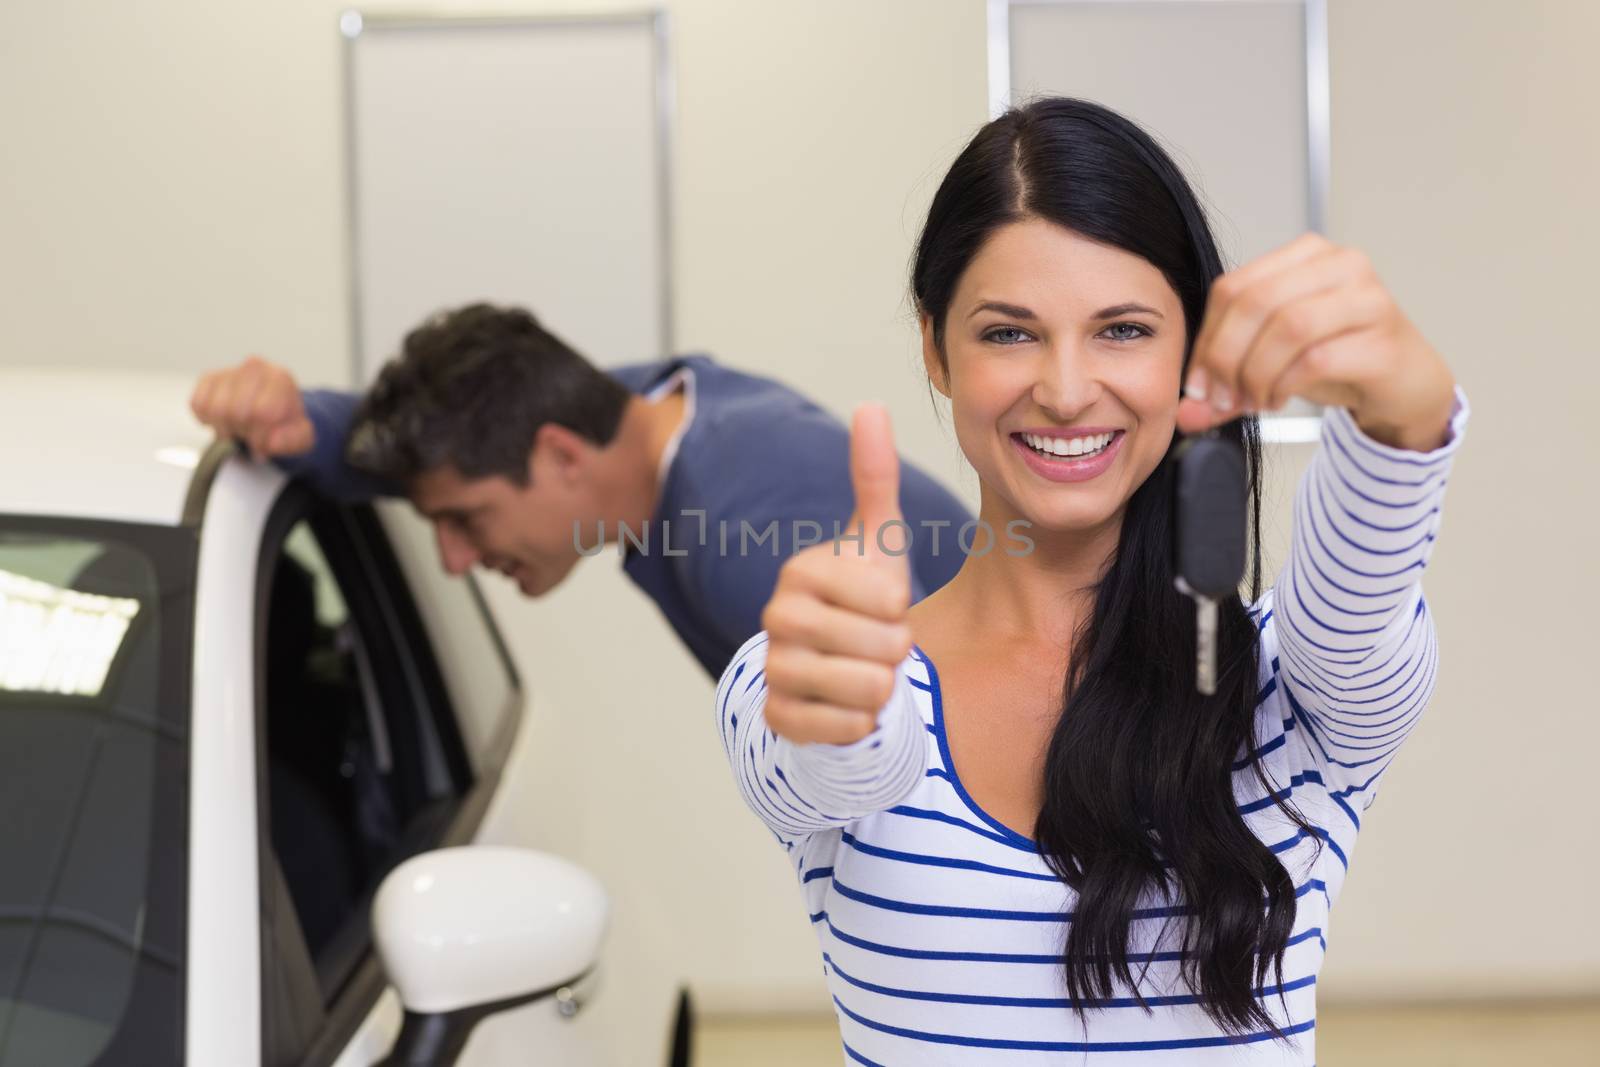 Customer holding her new car key while giving thumbs up at new car showroom